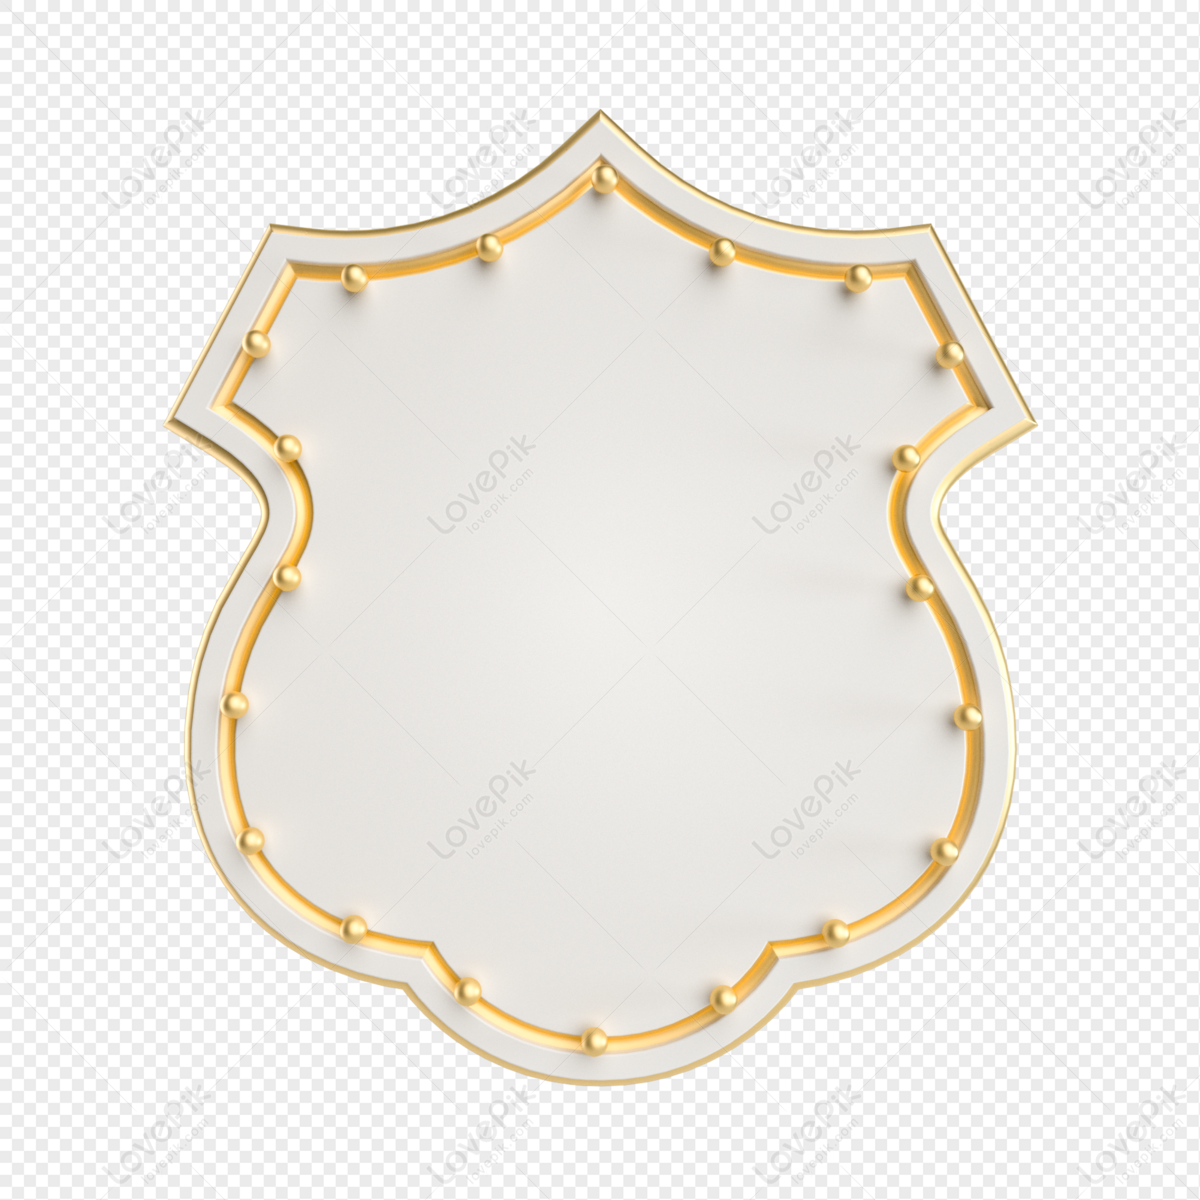 Platinum Shield PNG Images With Transparent Background | Free Download ...